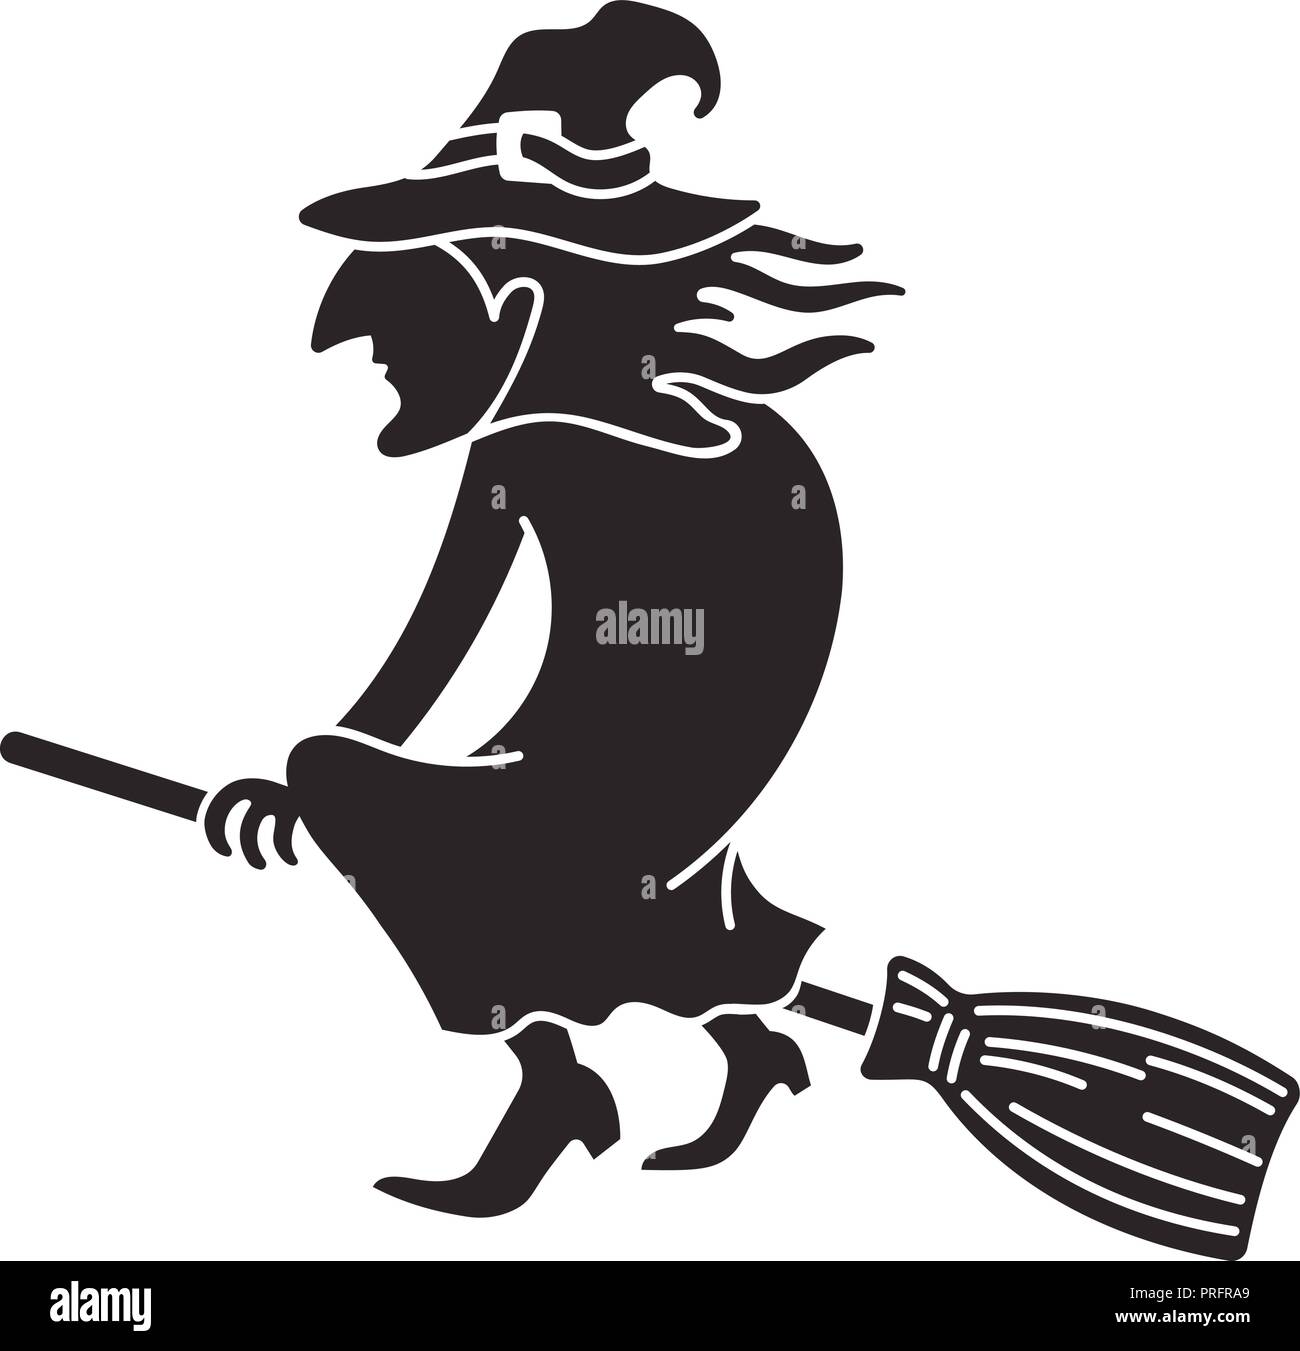 Witch Silhouette Stock Photos & Witch Silhouette Stock Images - Alamy1300 x 1351